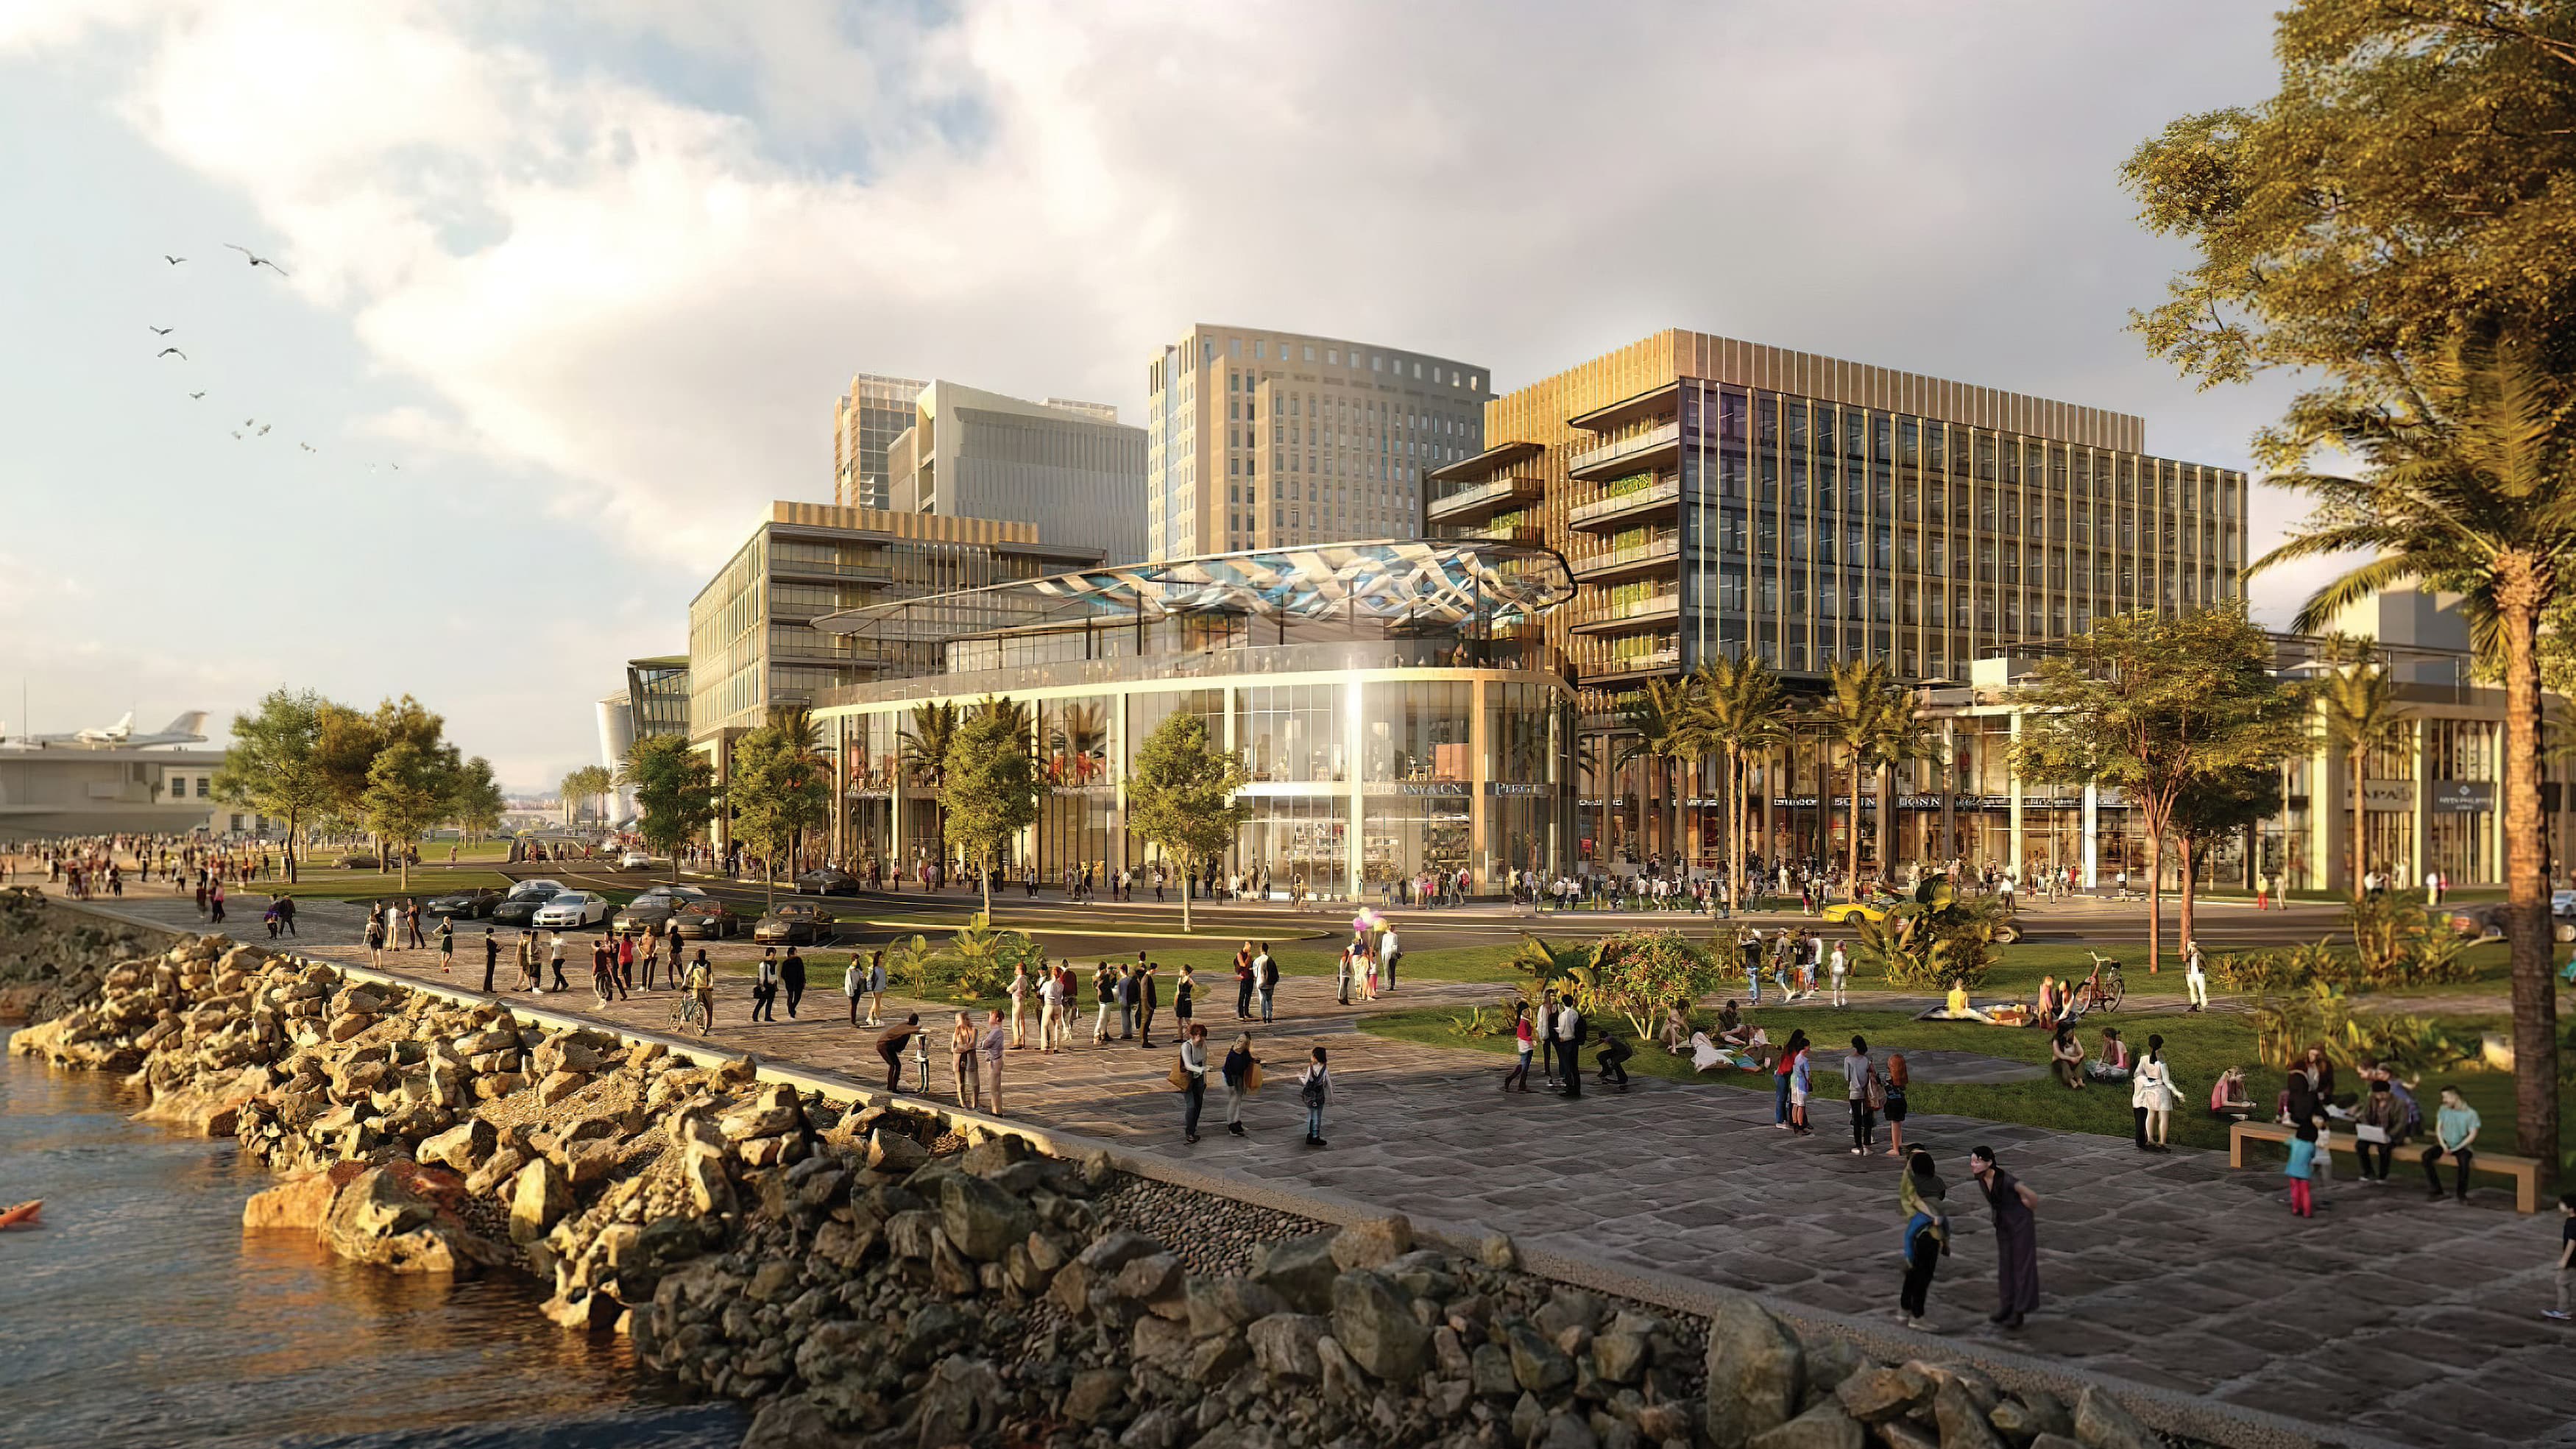 The Research and Development District (RaDD) on the waterfront of downtown San Diego, California.